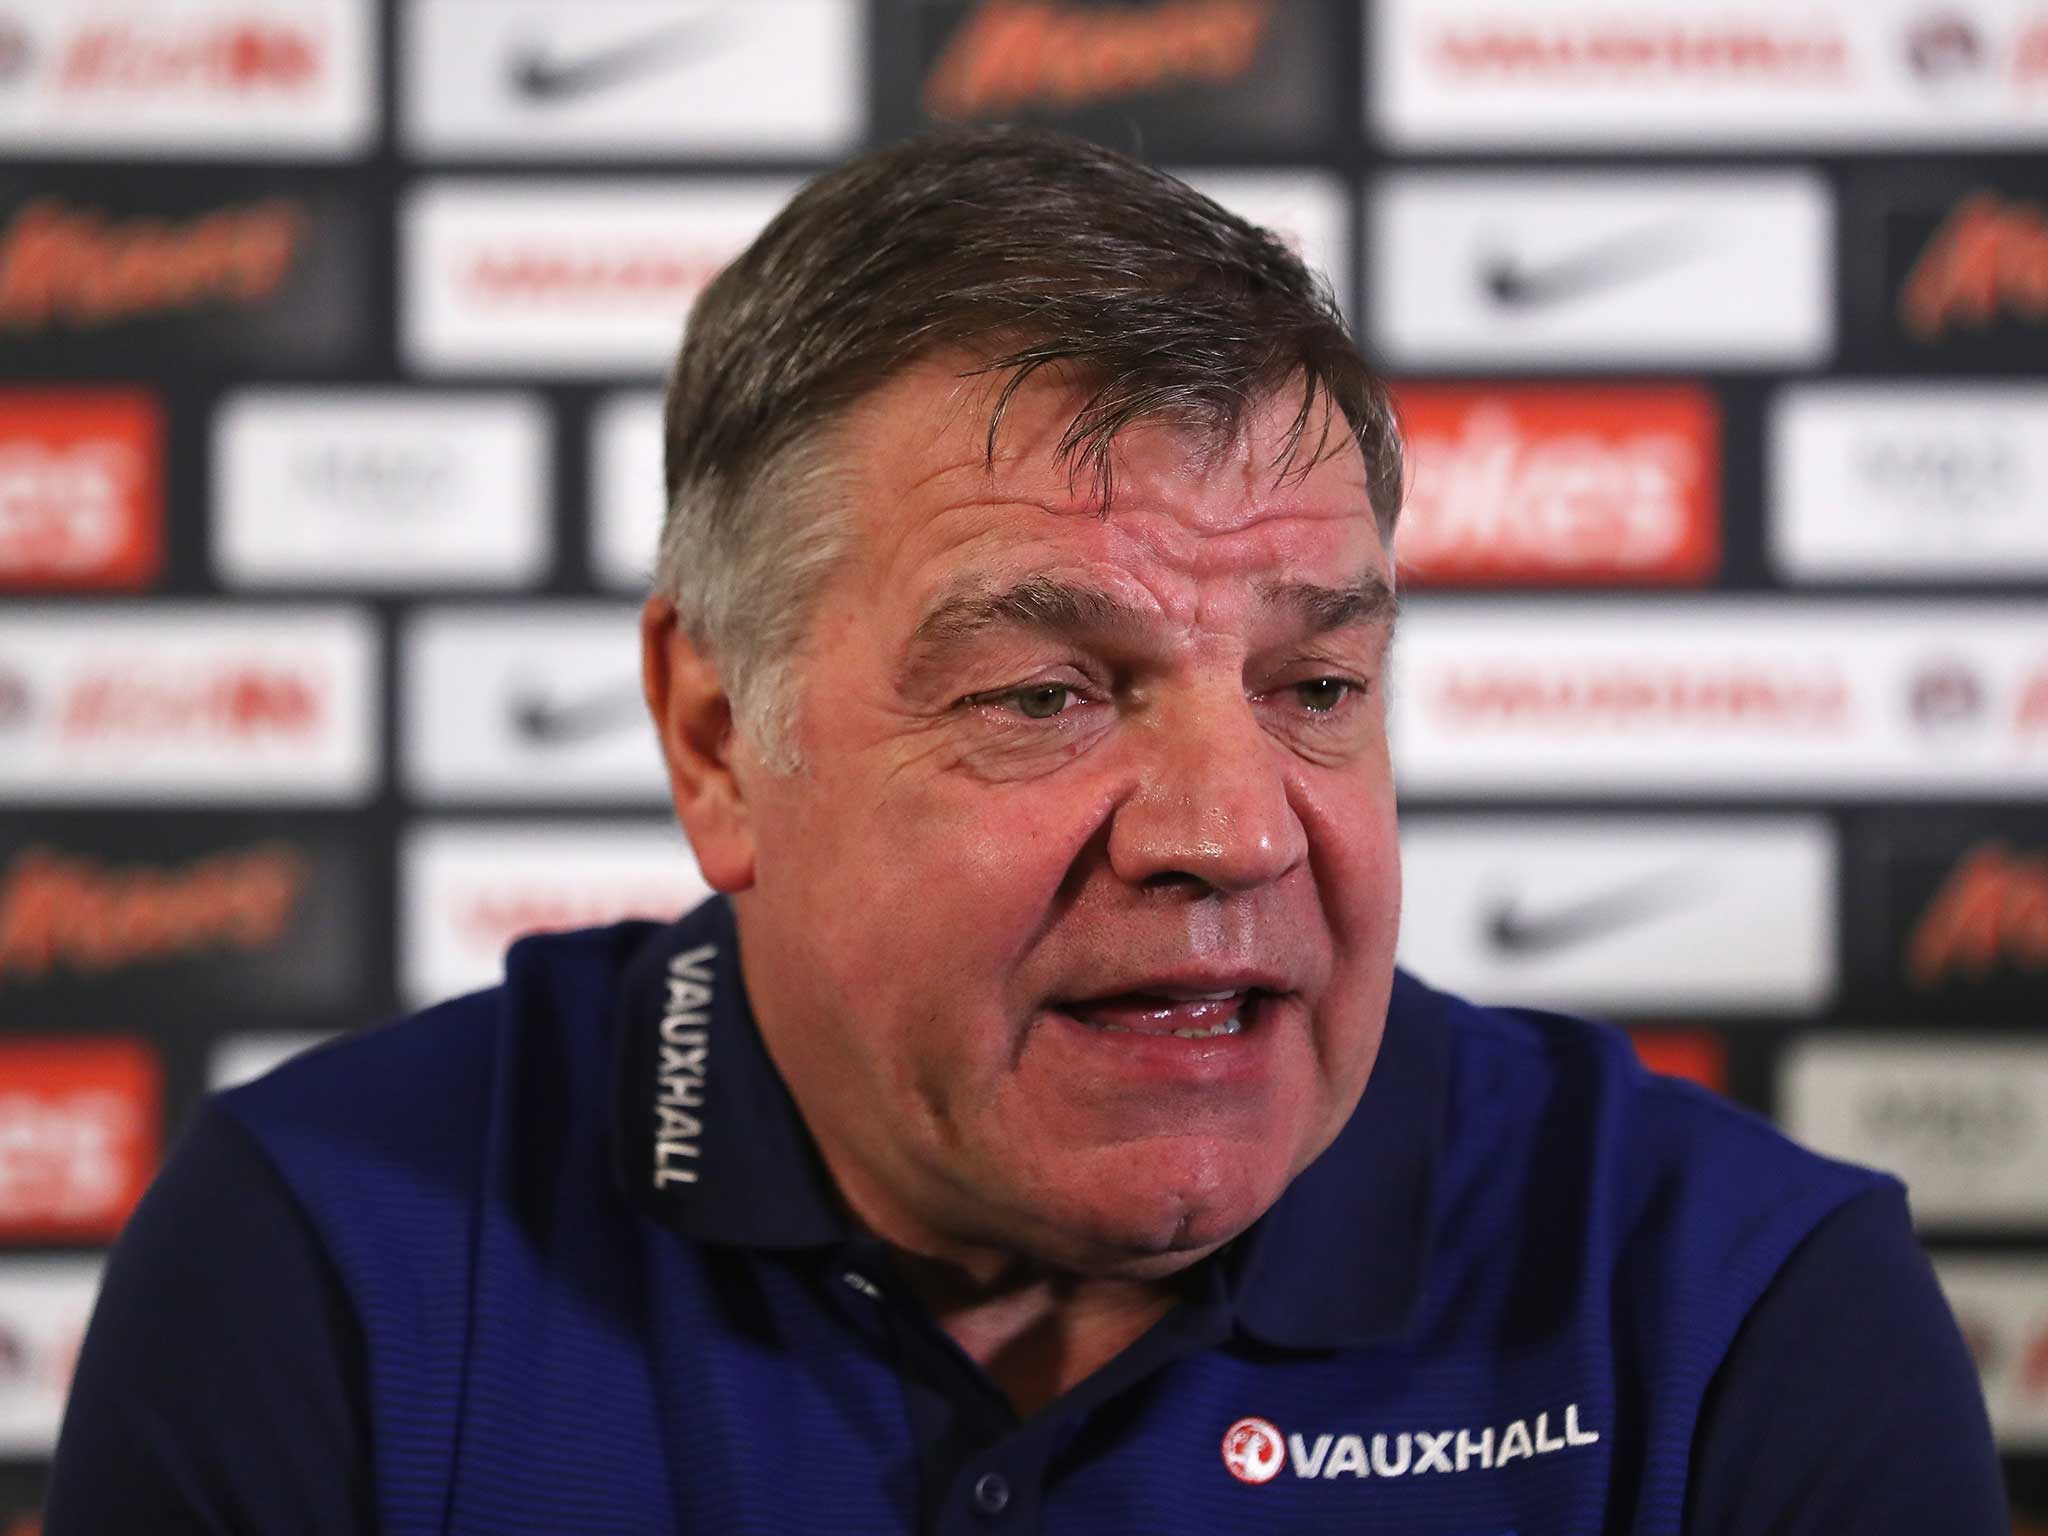 &#13;
Allardyce is reluctant to use ex-players in his coaching set-up &#13;